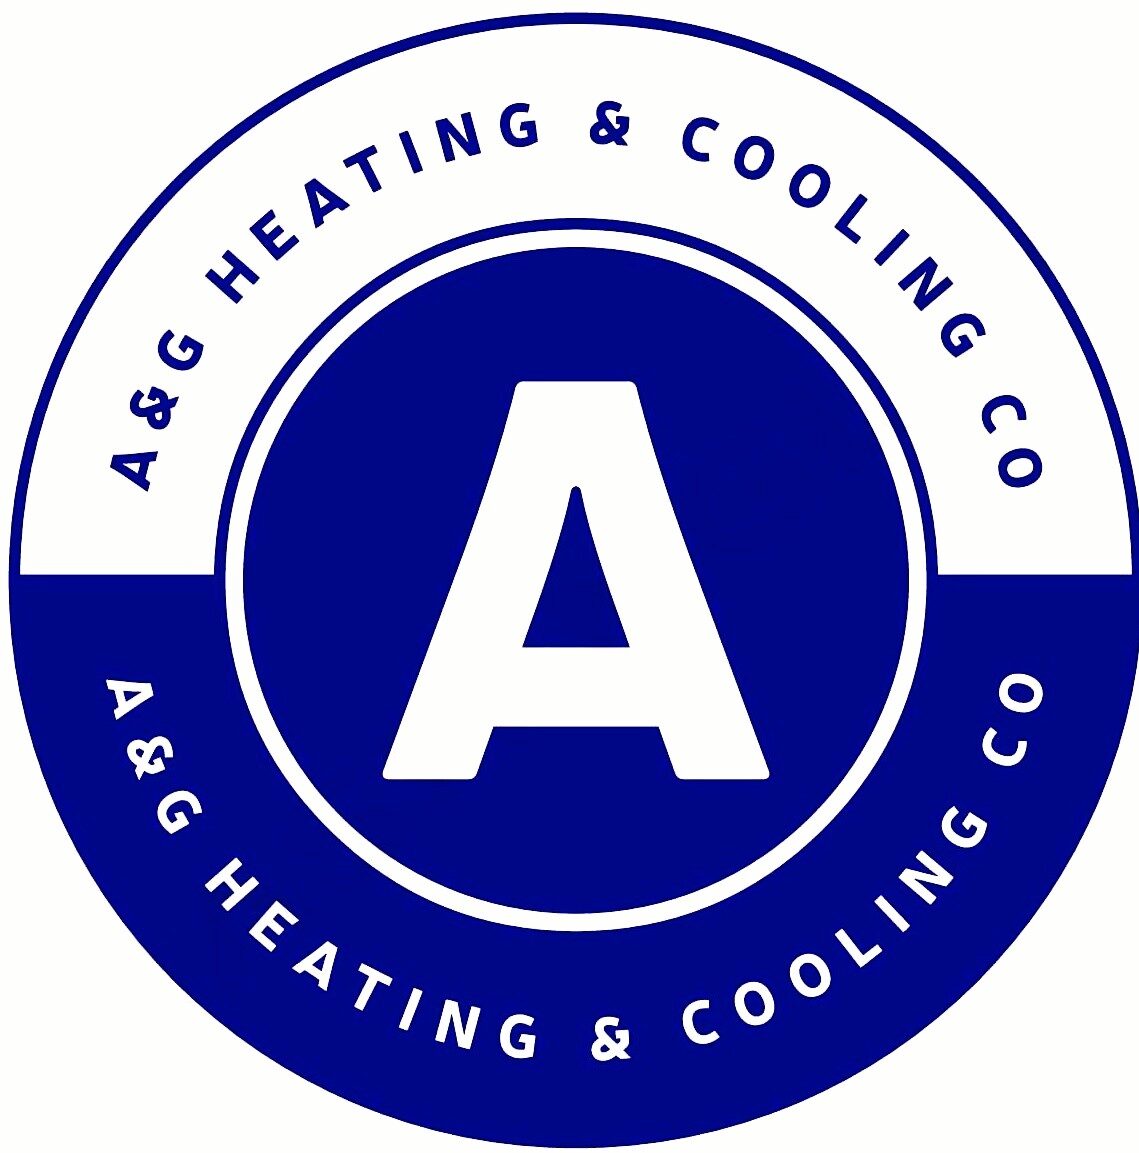 A&H Heating & Cooling Co Of Kingsport